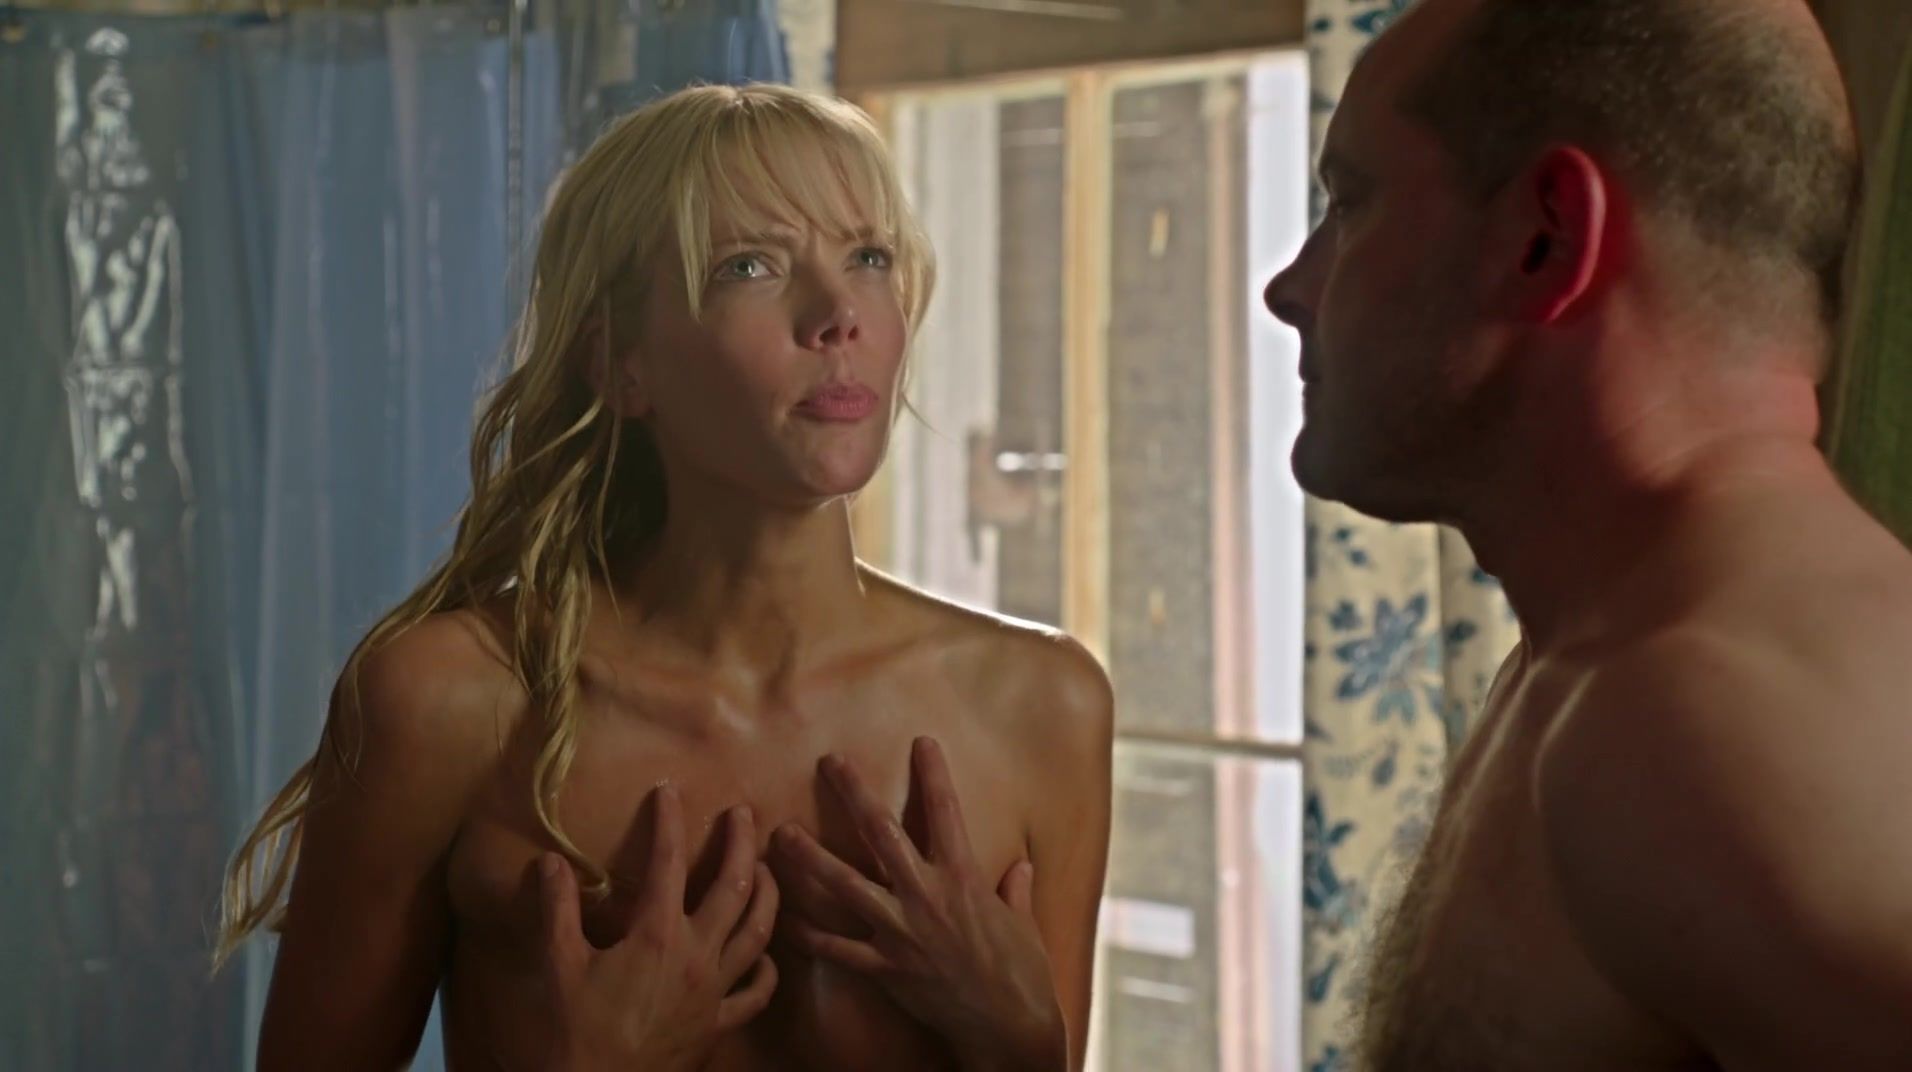 Lezdom Celebs Full Frontal Scene with sexy Riki Lindhome | The movie "Hell Baby" | Released in 2013 Vergon - 1